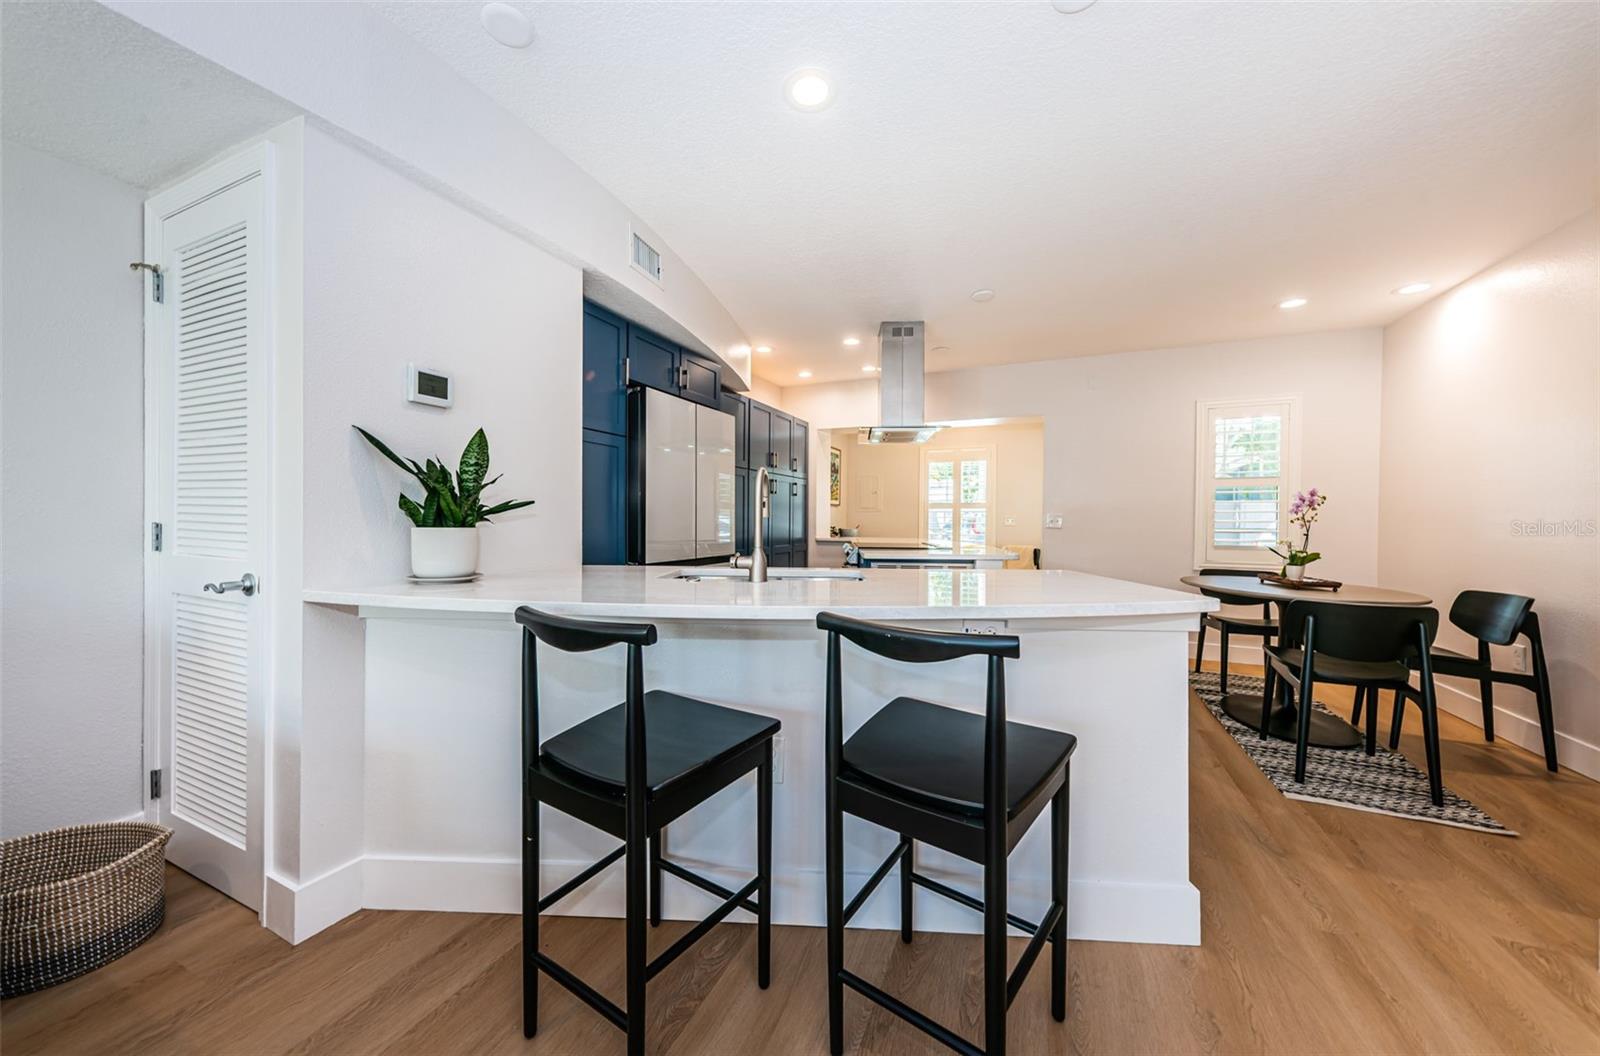 The kitchen is ideal for socializing.